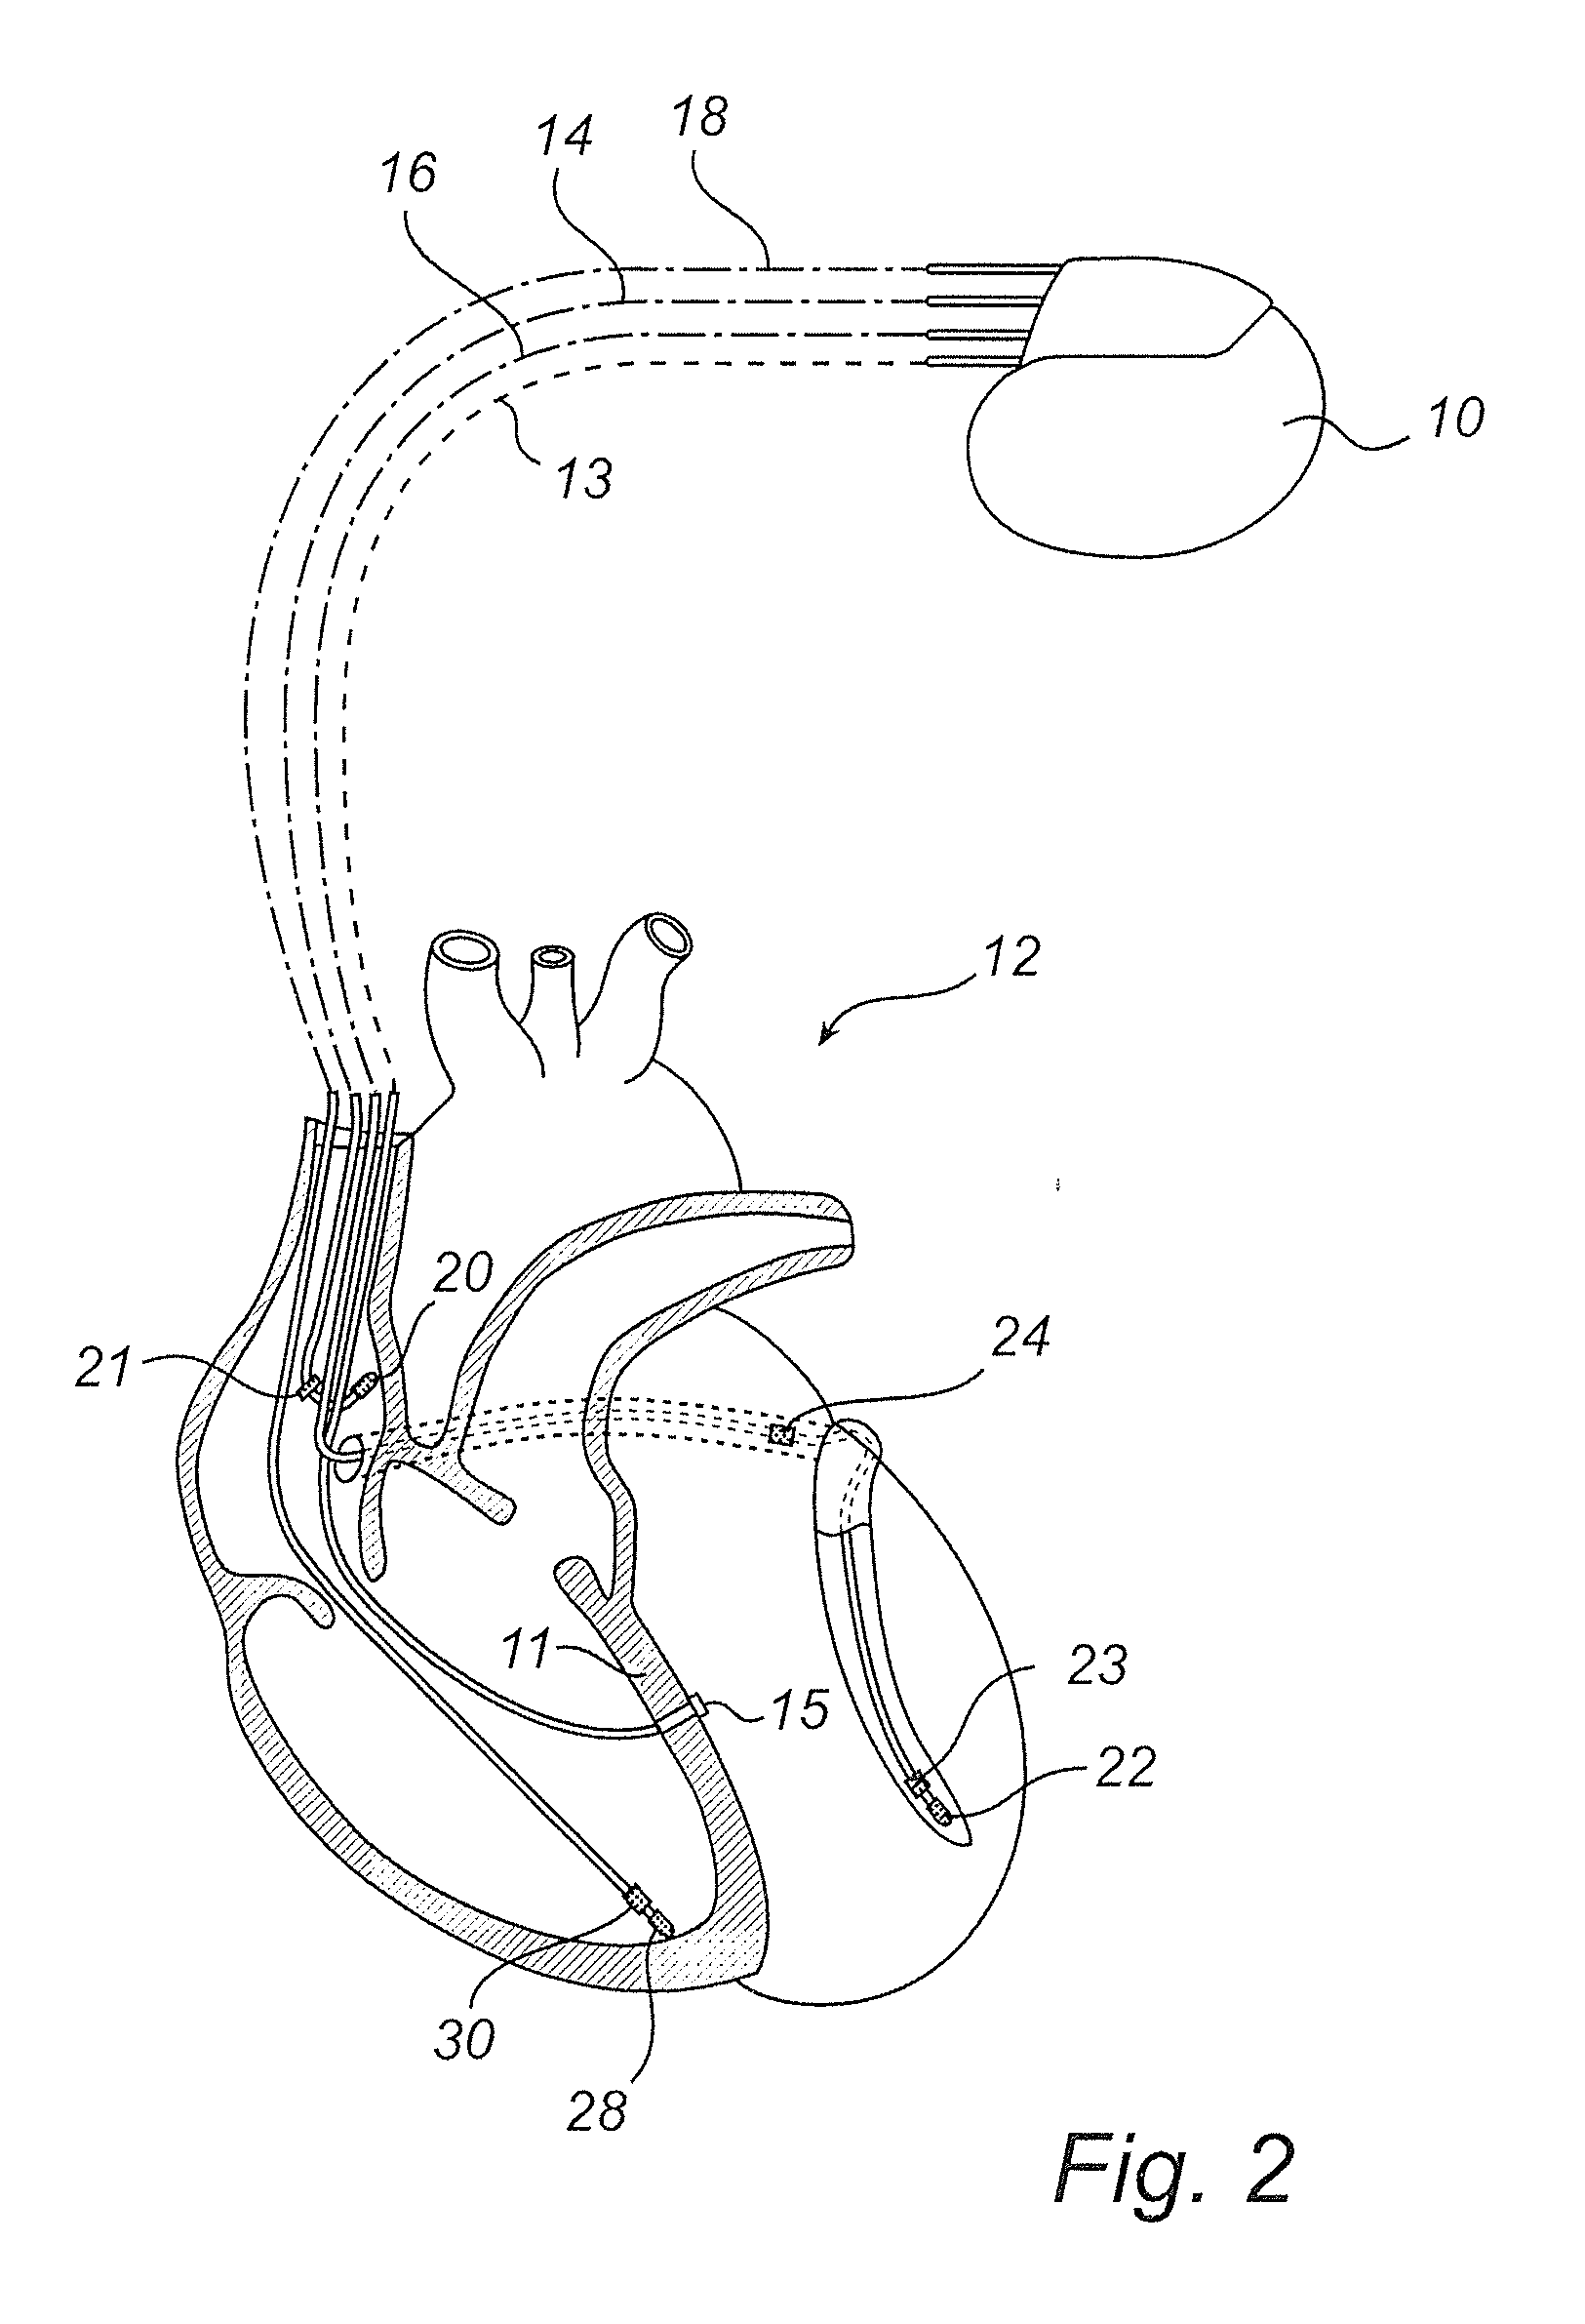 Method and system for adapting pacing settings of a cardiac stimulator